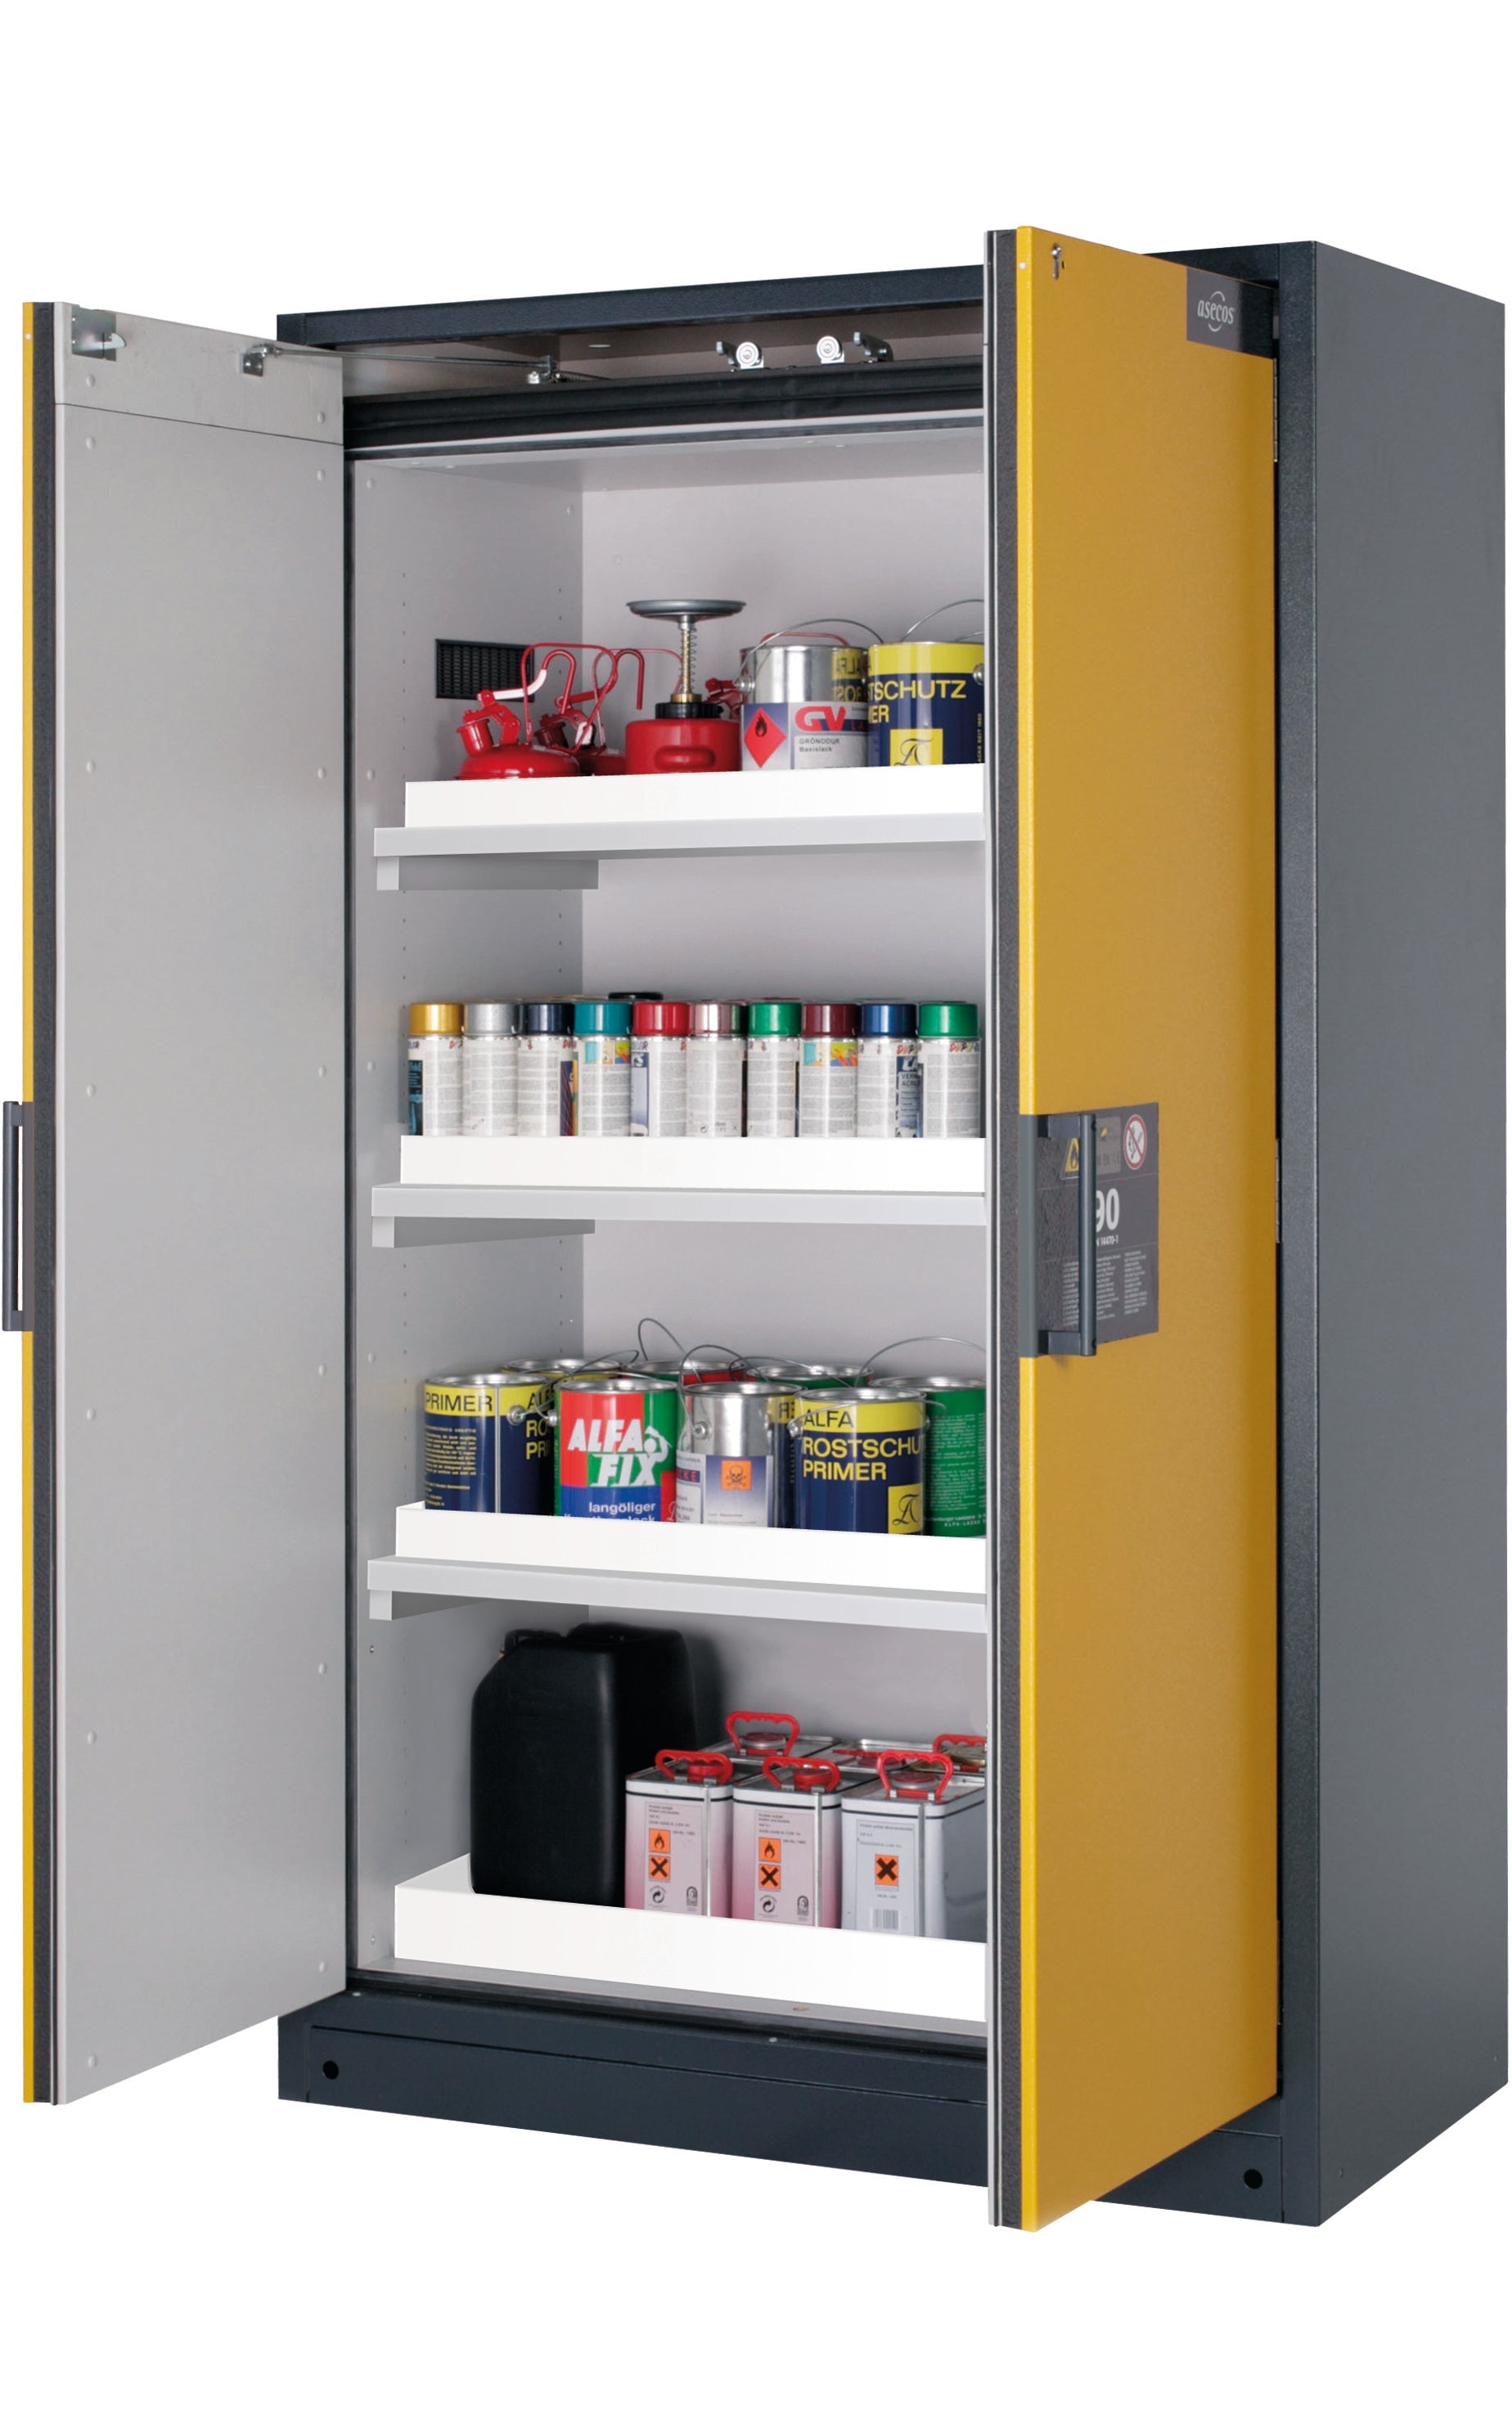 Type 90 safety storage cabinet Q-CLASSIC-90 model Q90.195.120 in warning yellow RAL 1004 with 3x tray shelf (standard) (polypropylene),